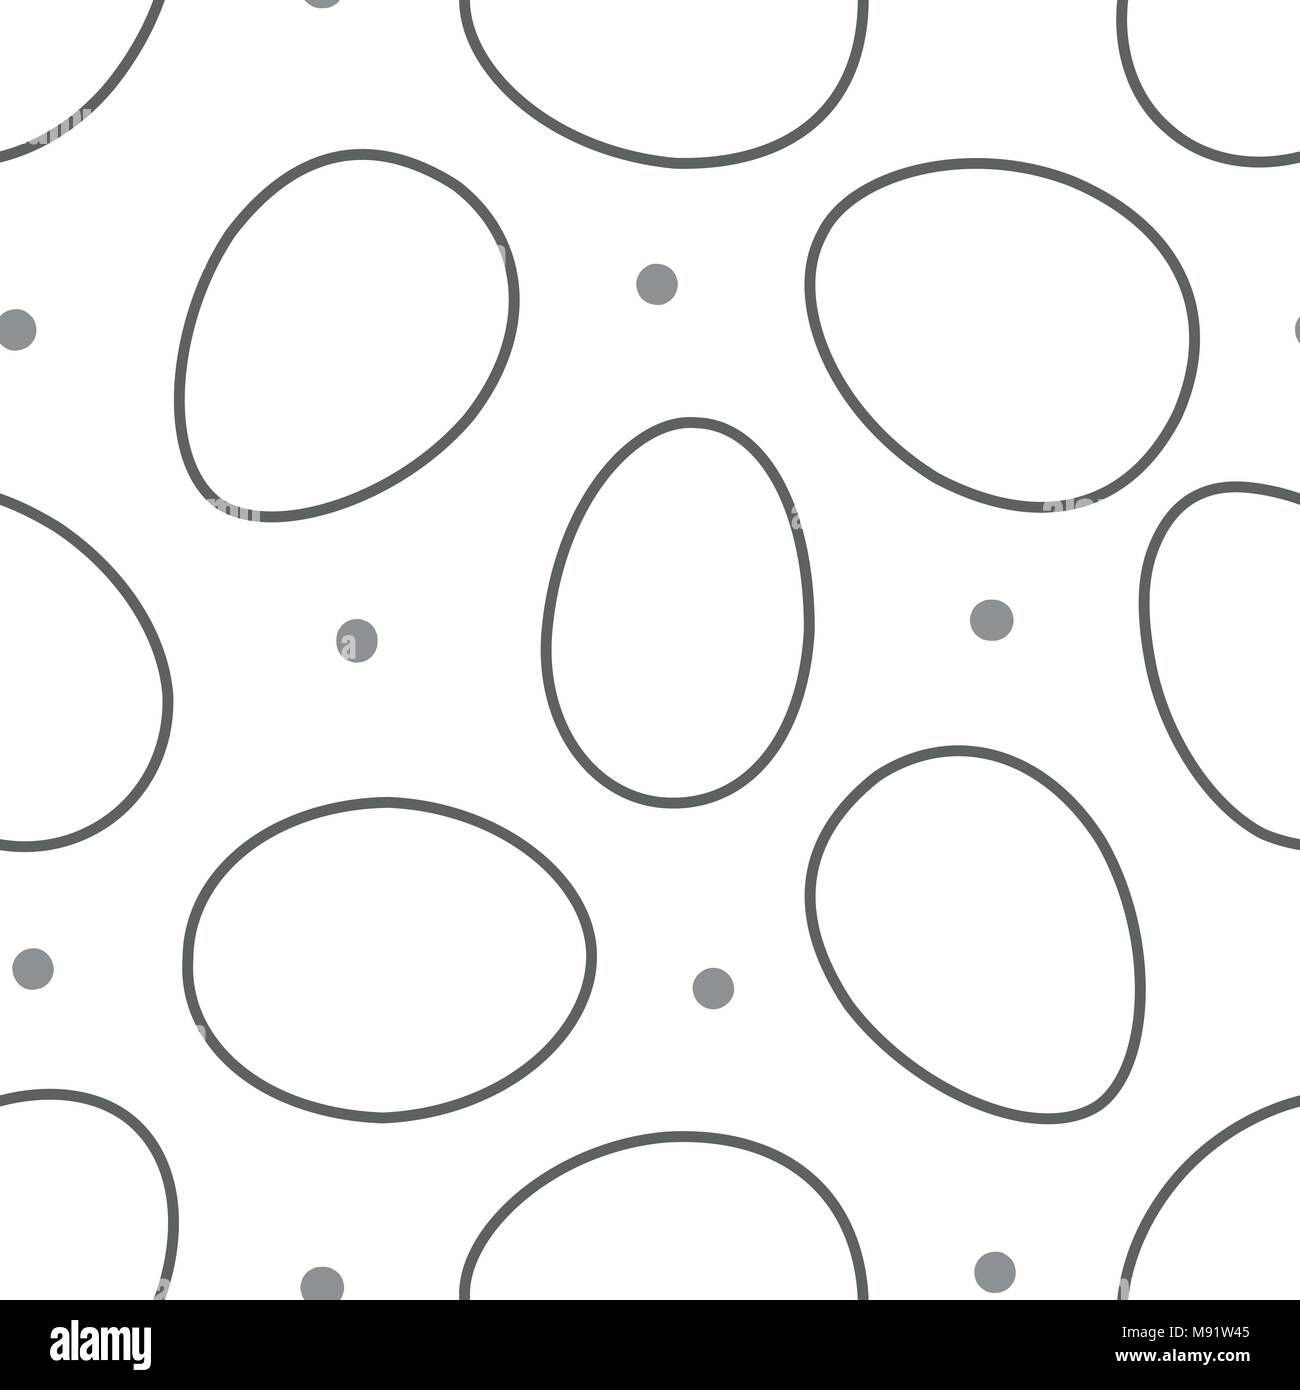 Easter eggs in gray outline and dots random on white background. Cute hand drawn seamless pattern design for Easter festival in vector illustration. Stock Vector